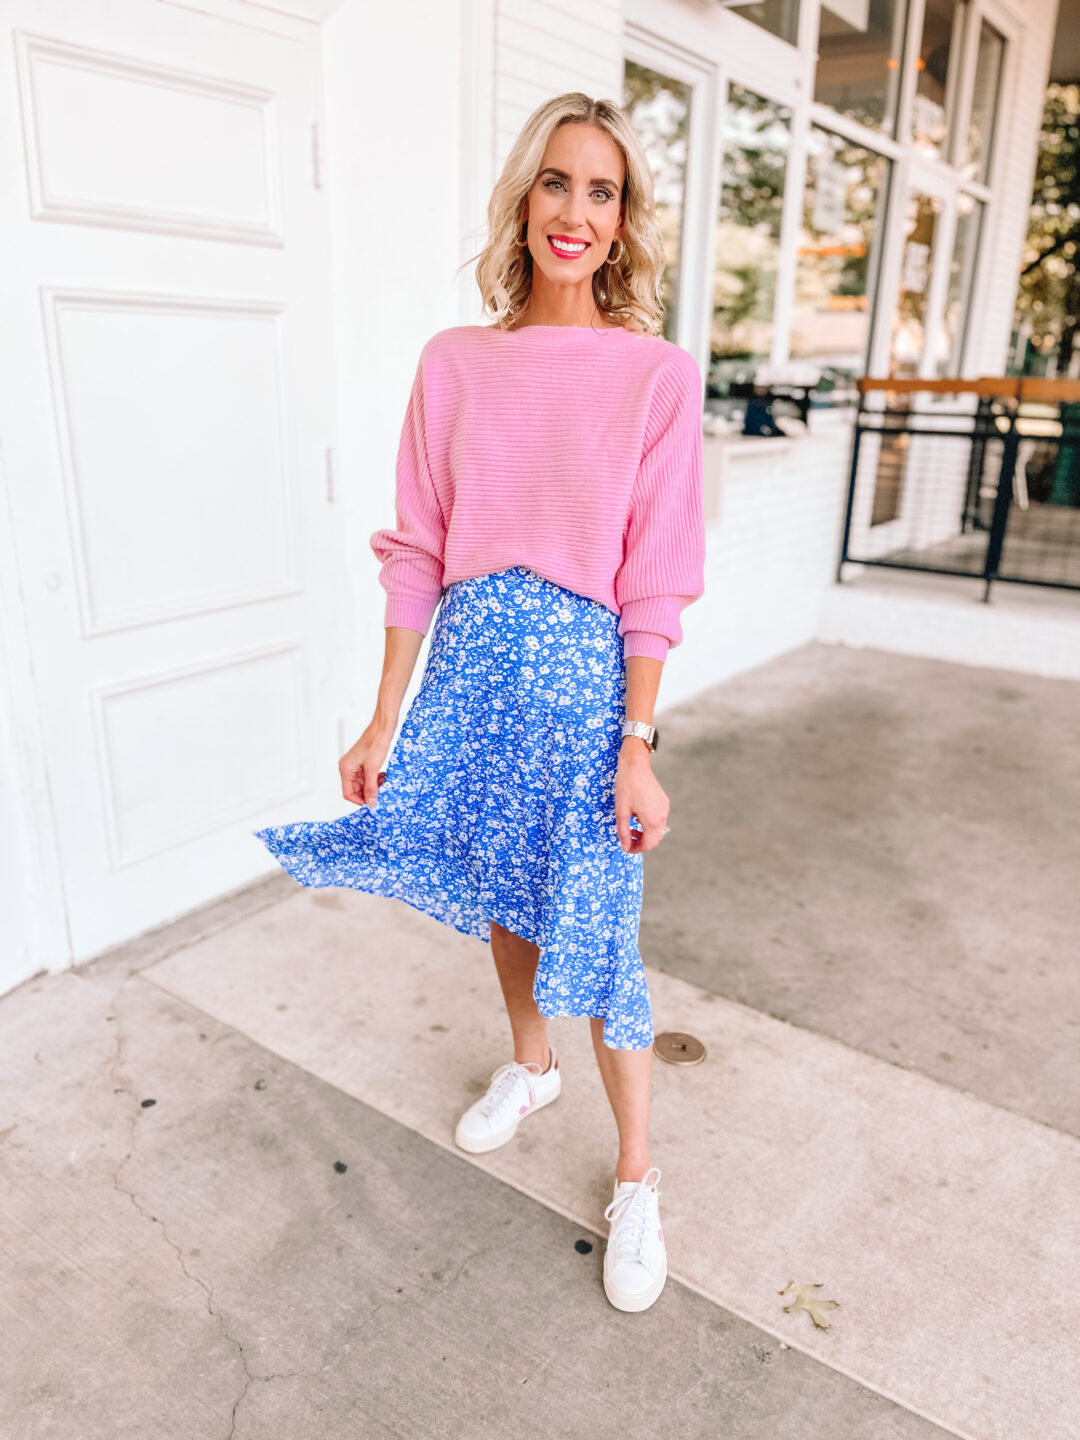 Sweater Outfitting How to Style Your Favorite Skirts with Sweaters  Shop  The Mint